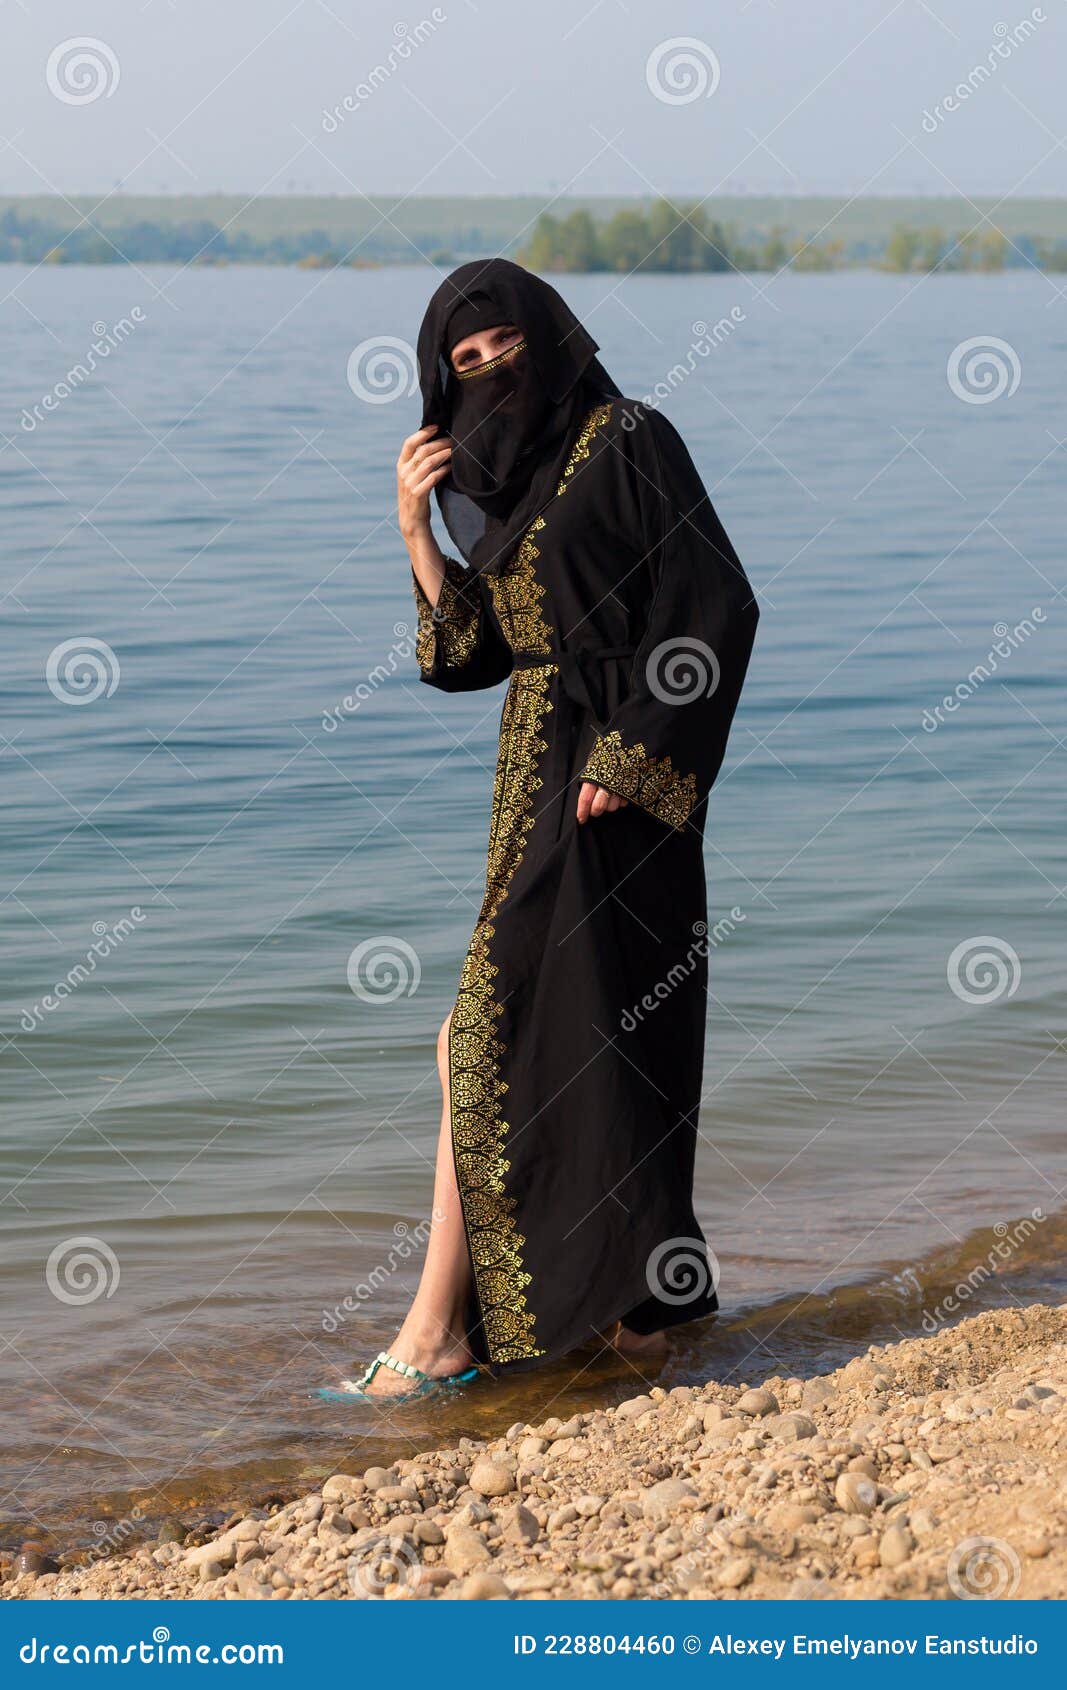 504 Muslim Feet Photos Free & Royalty-Free Stock Photos from Dreamstime